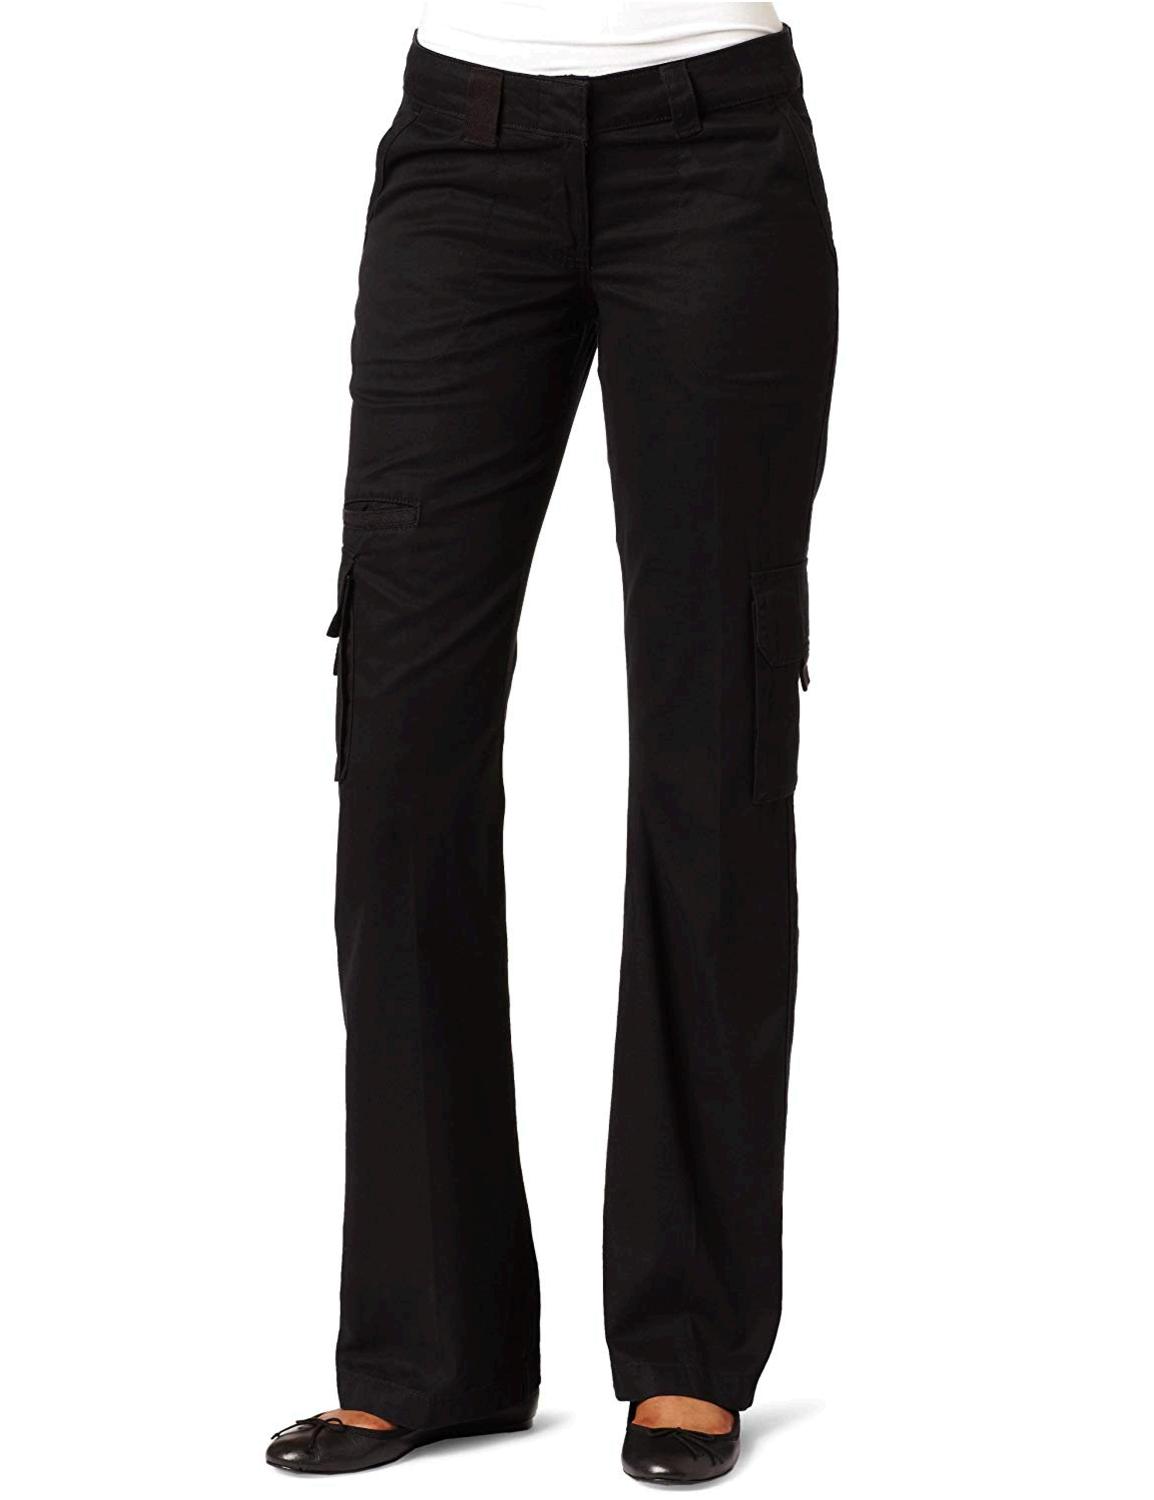 Dickies Women's Relaxed Cargo Pant Rinsed Black, Rinsed Black, Size 16. ...